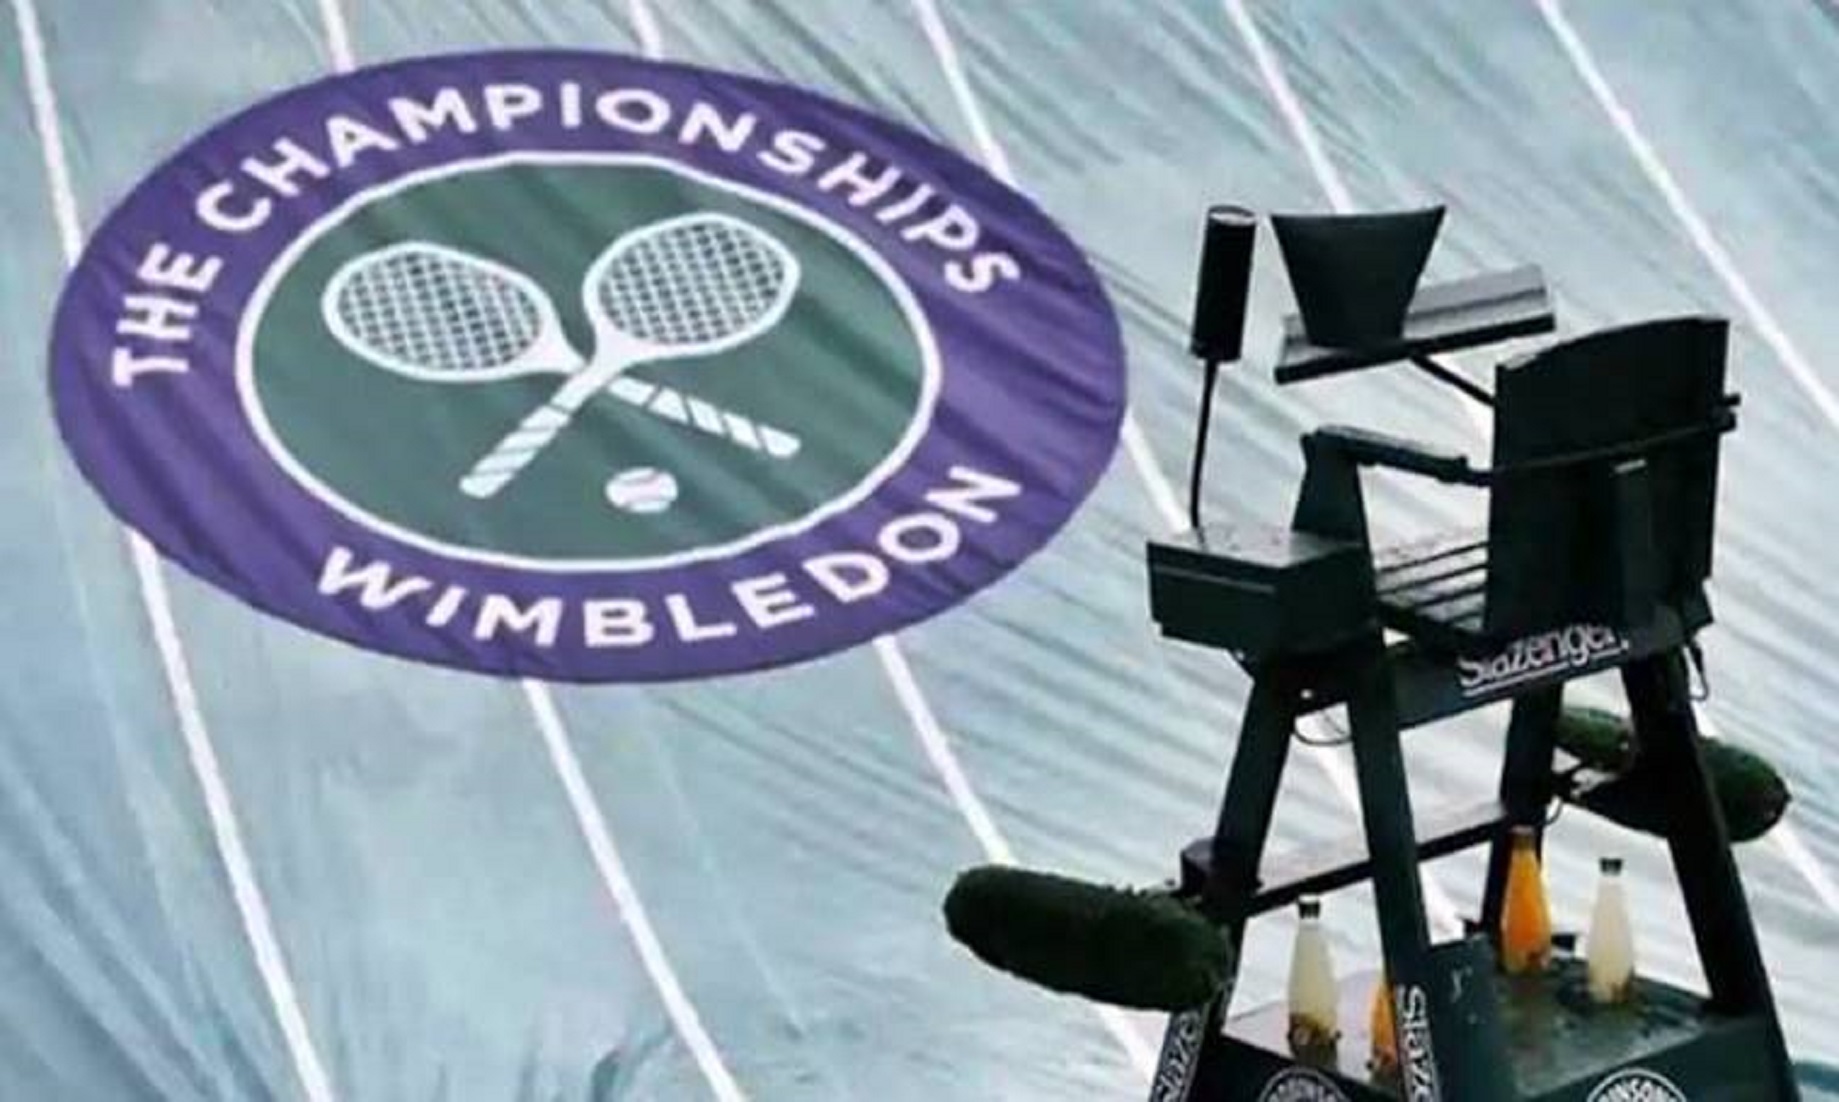 Wimbledon 2020 Cancelled Due To COVID-19 Pandemic